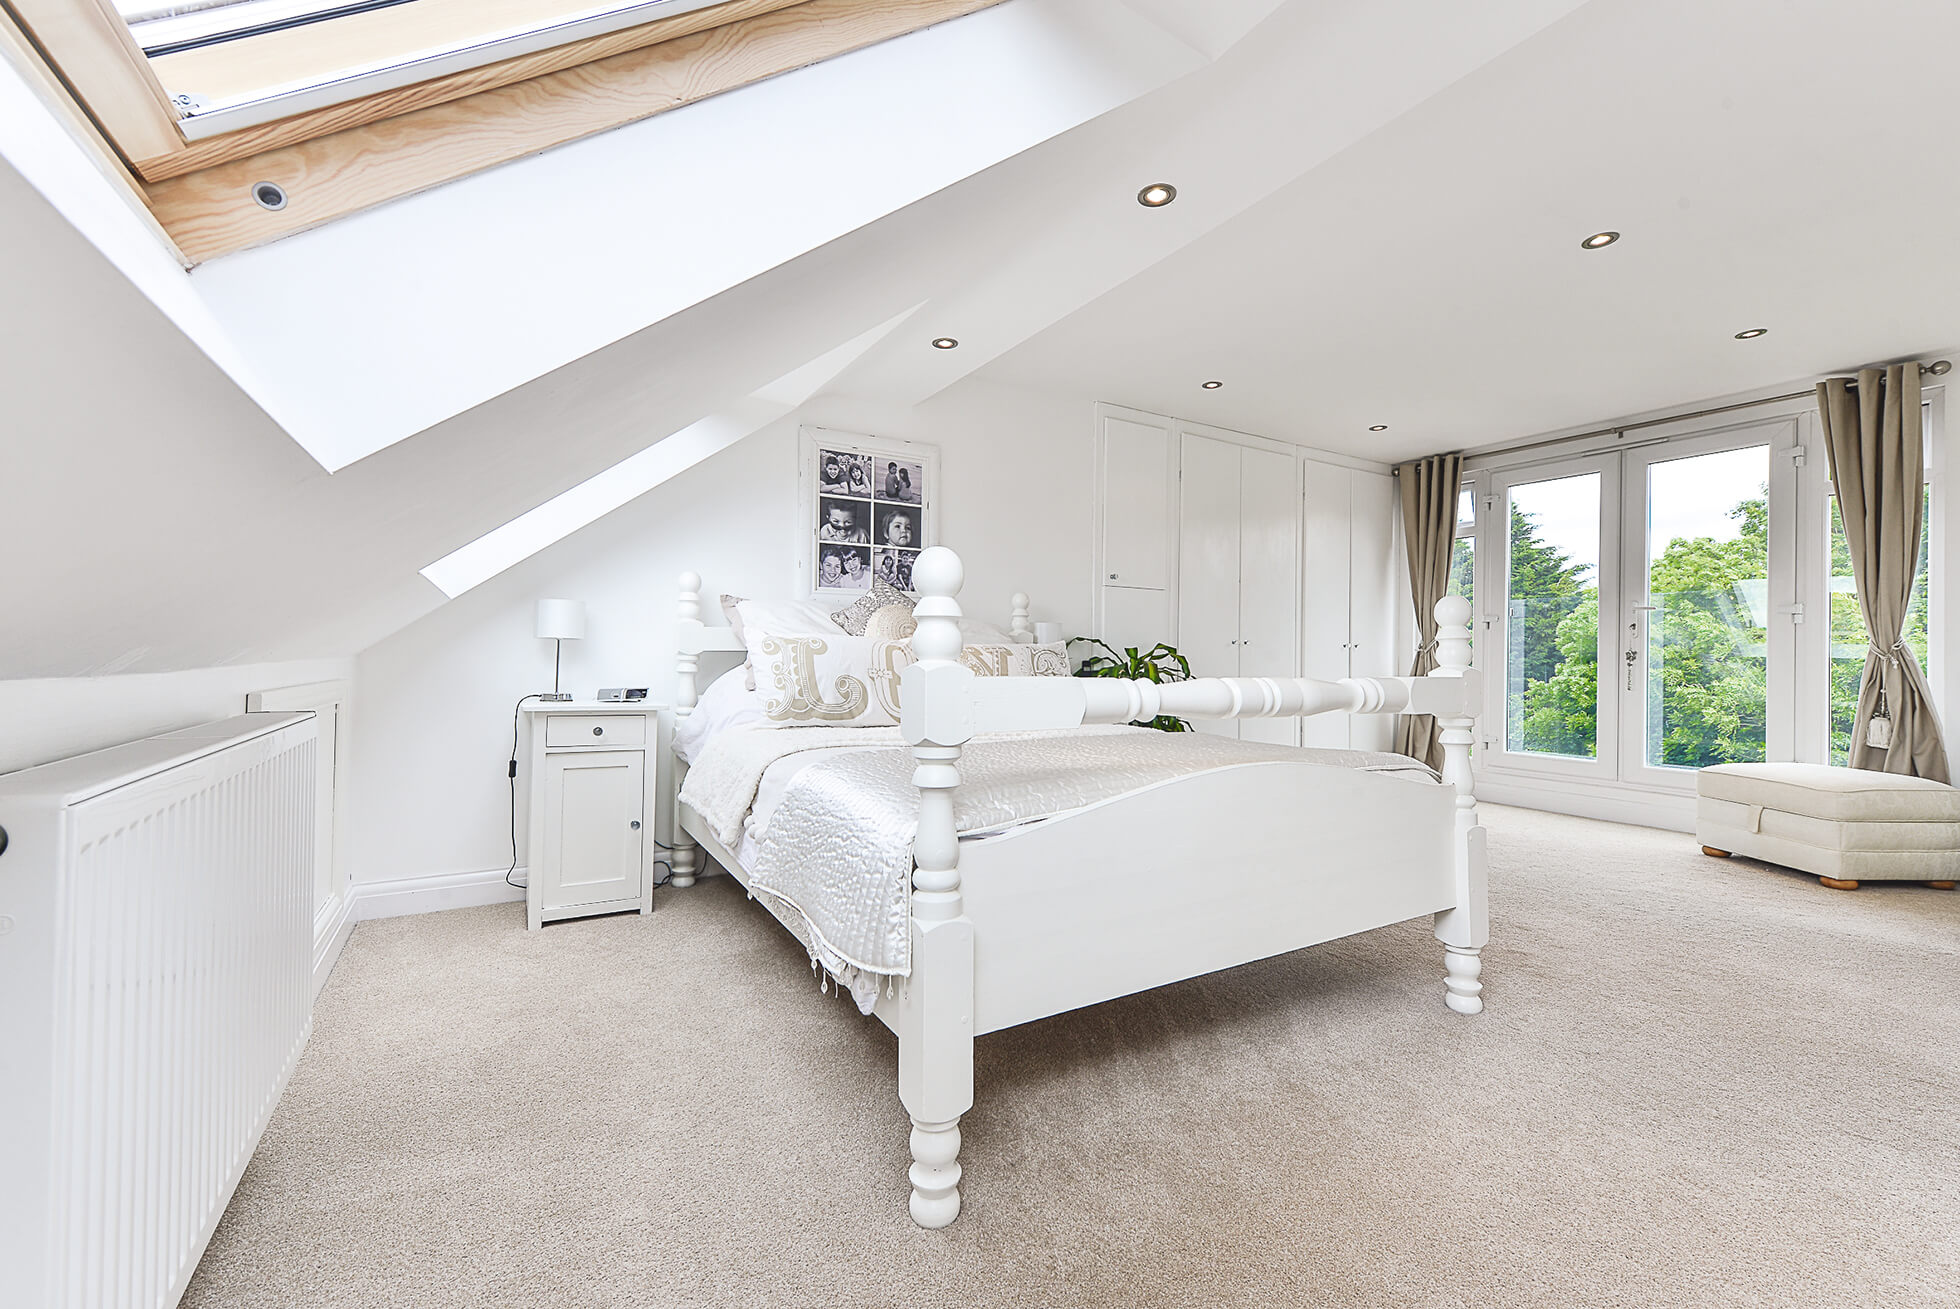 Do you have a question about converting your Loft in Pimlico? Here are the most popular questions asked by our clients.